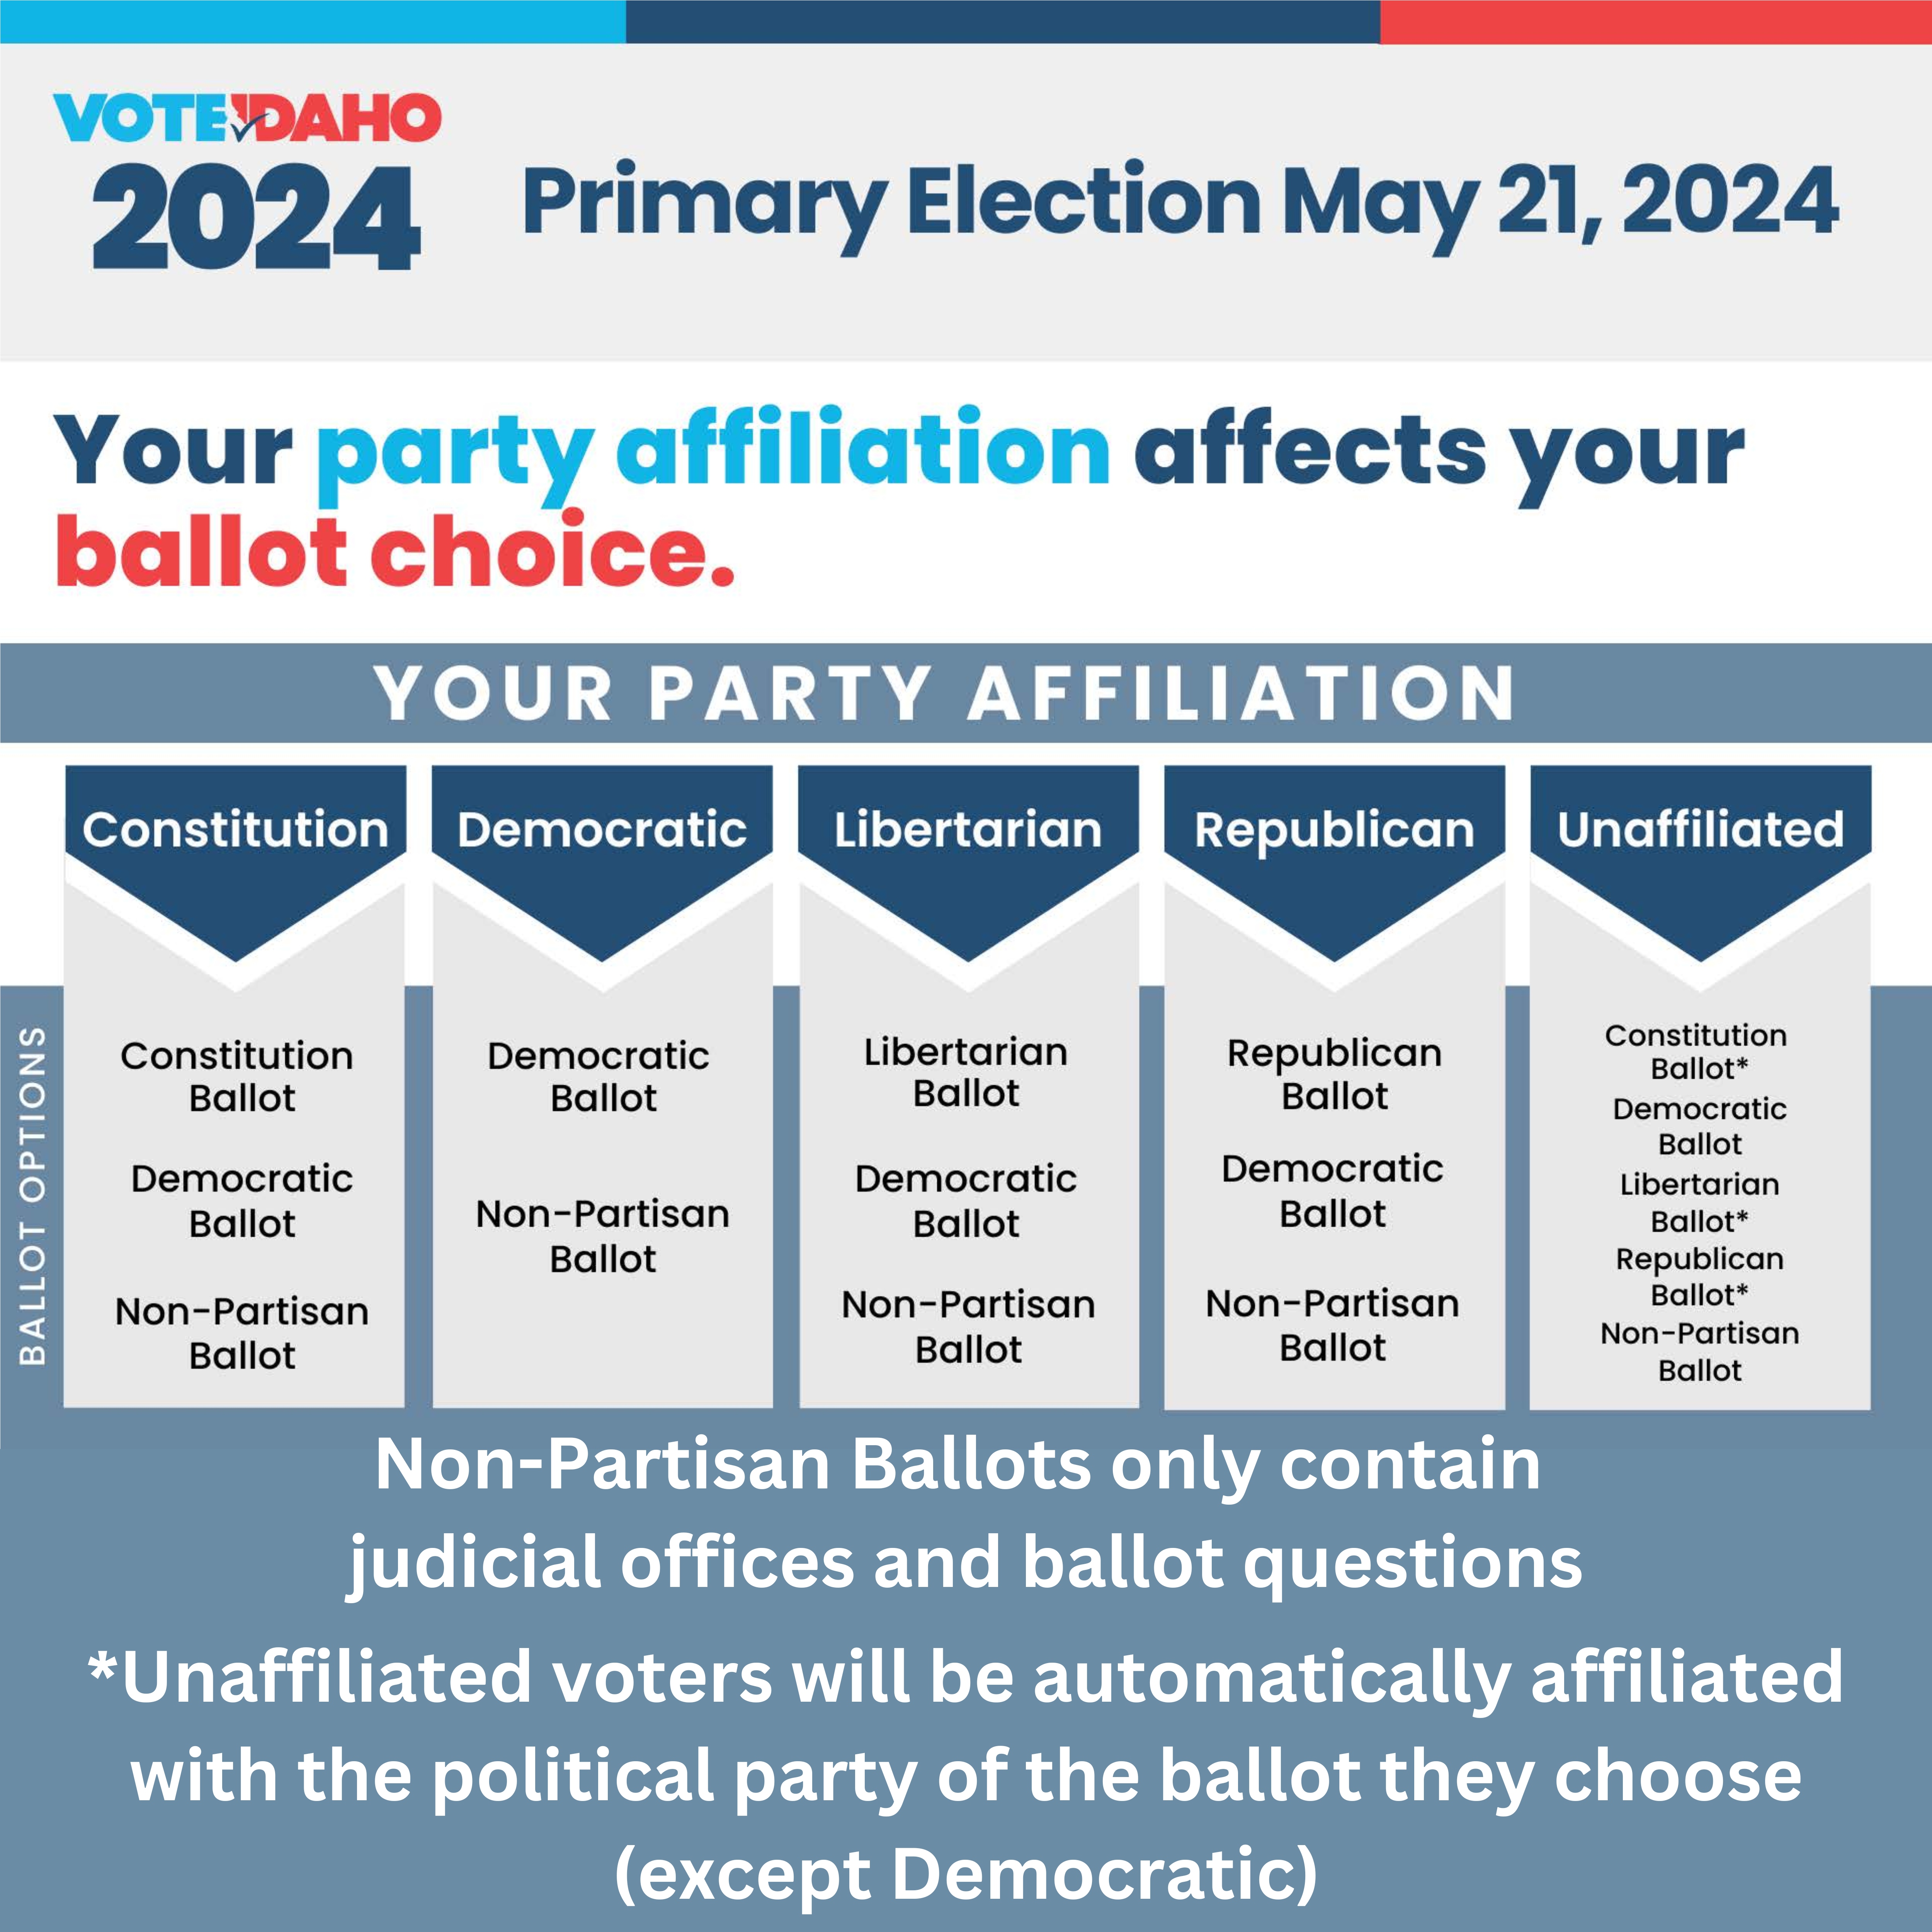 Primary Election May 21, 2024 Your Party Affiliation affects your ballot choice.